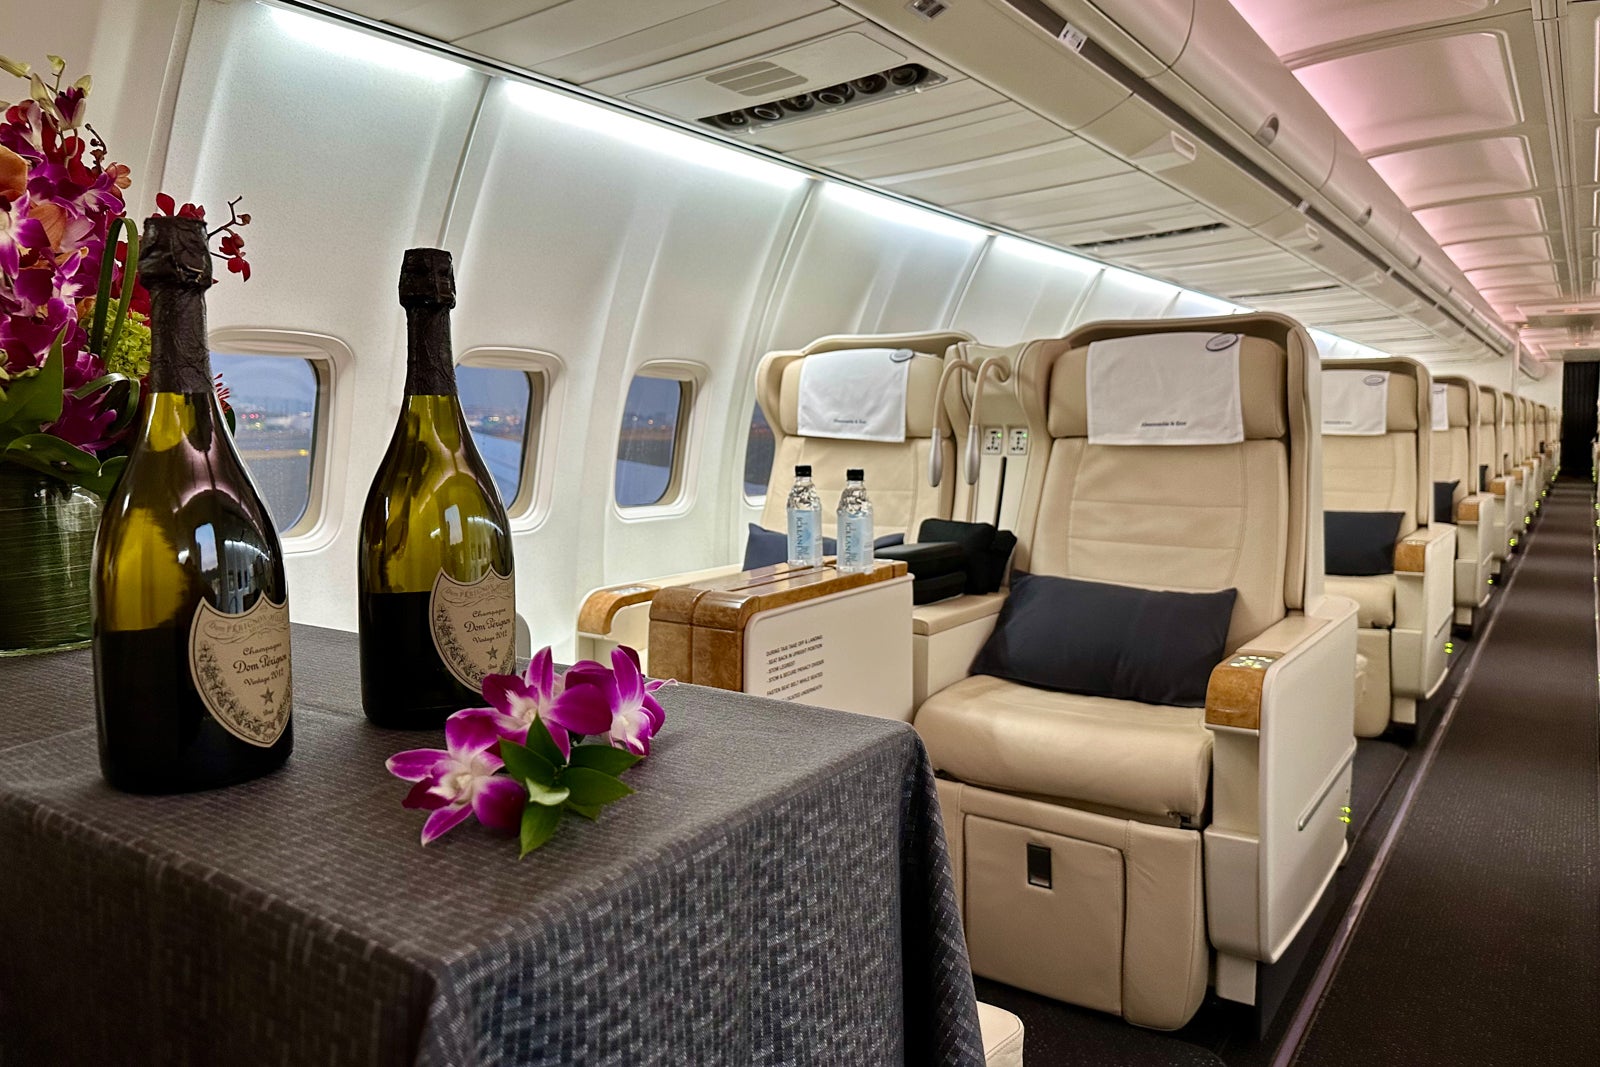 An exclusive look inside the $160,000-a-seat private Boeing 757 charter, with just 48 first-class seats